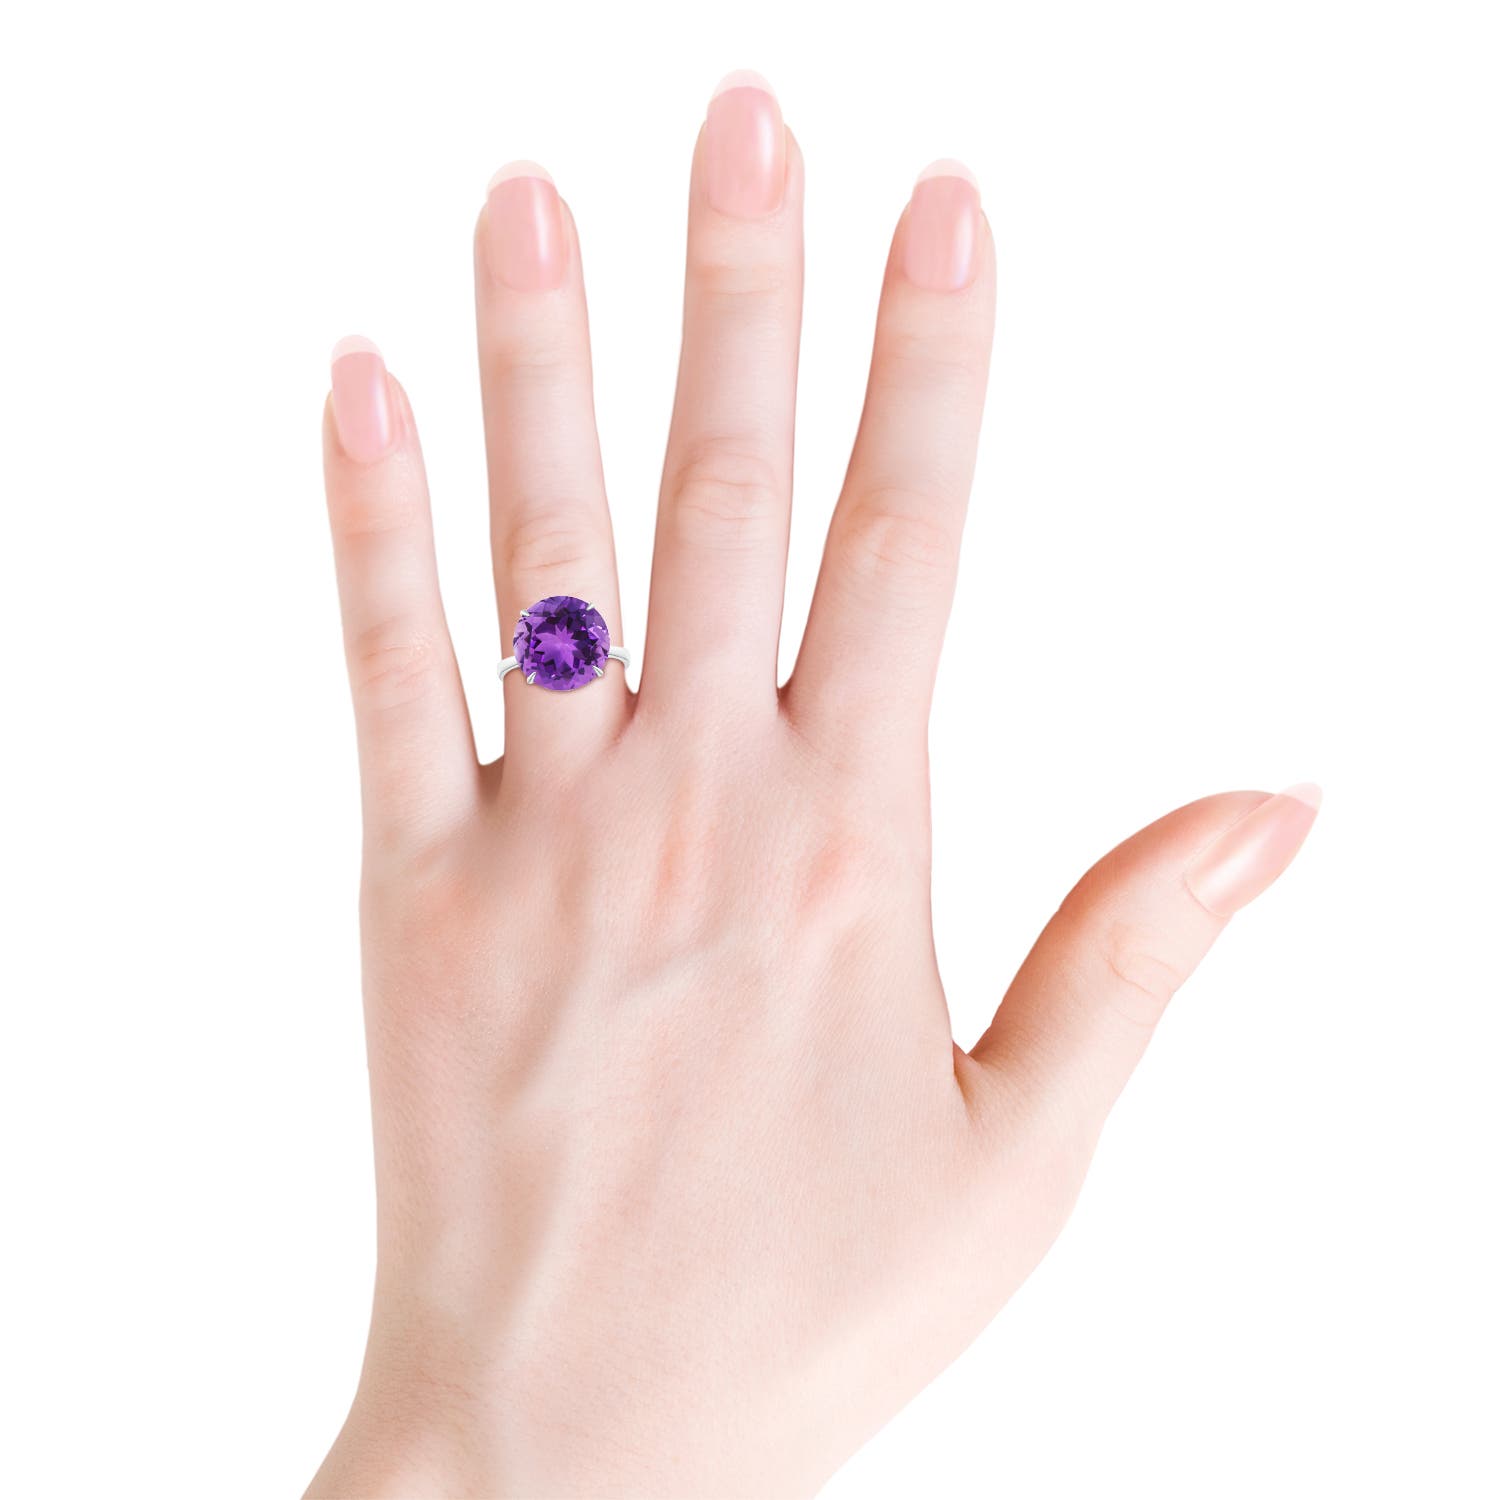 AAA - Amethyst / 7.2 CT / 14 KT White Gold